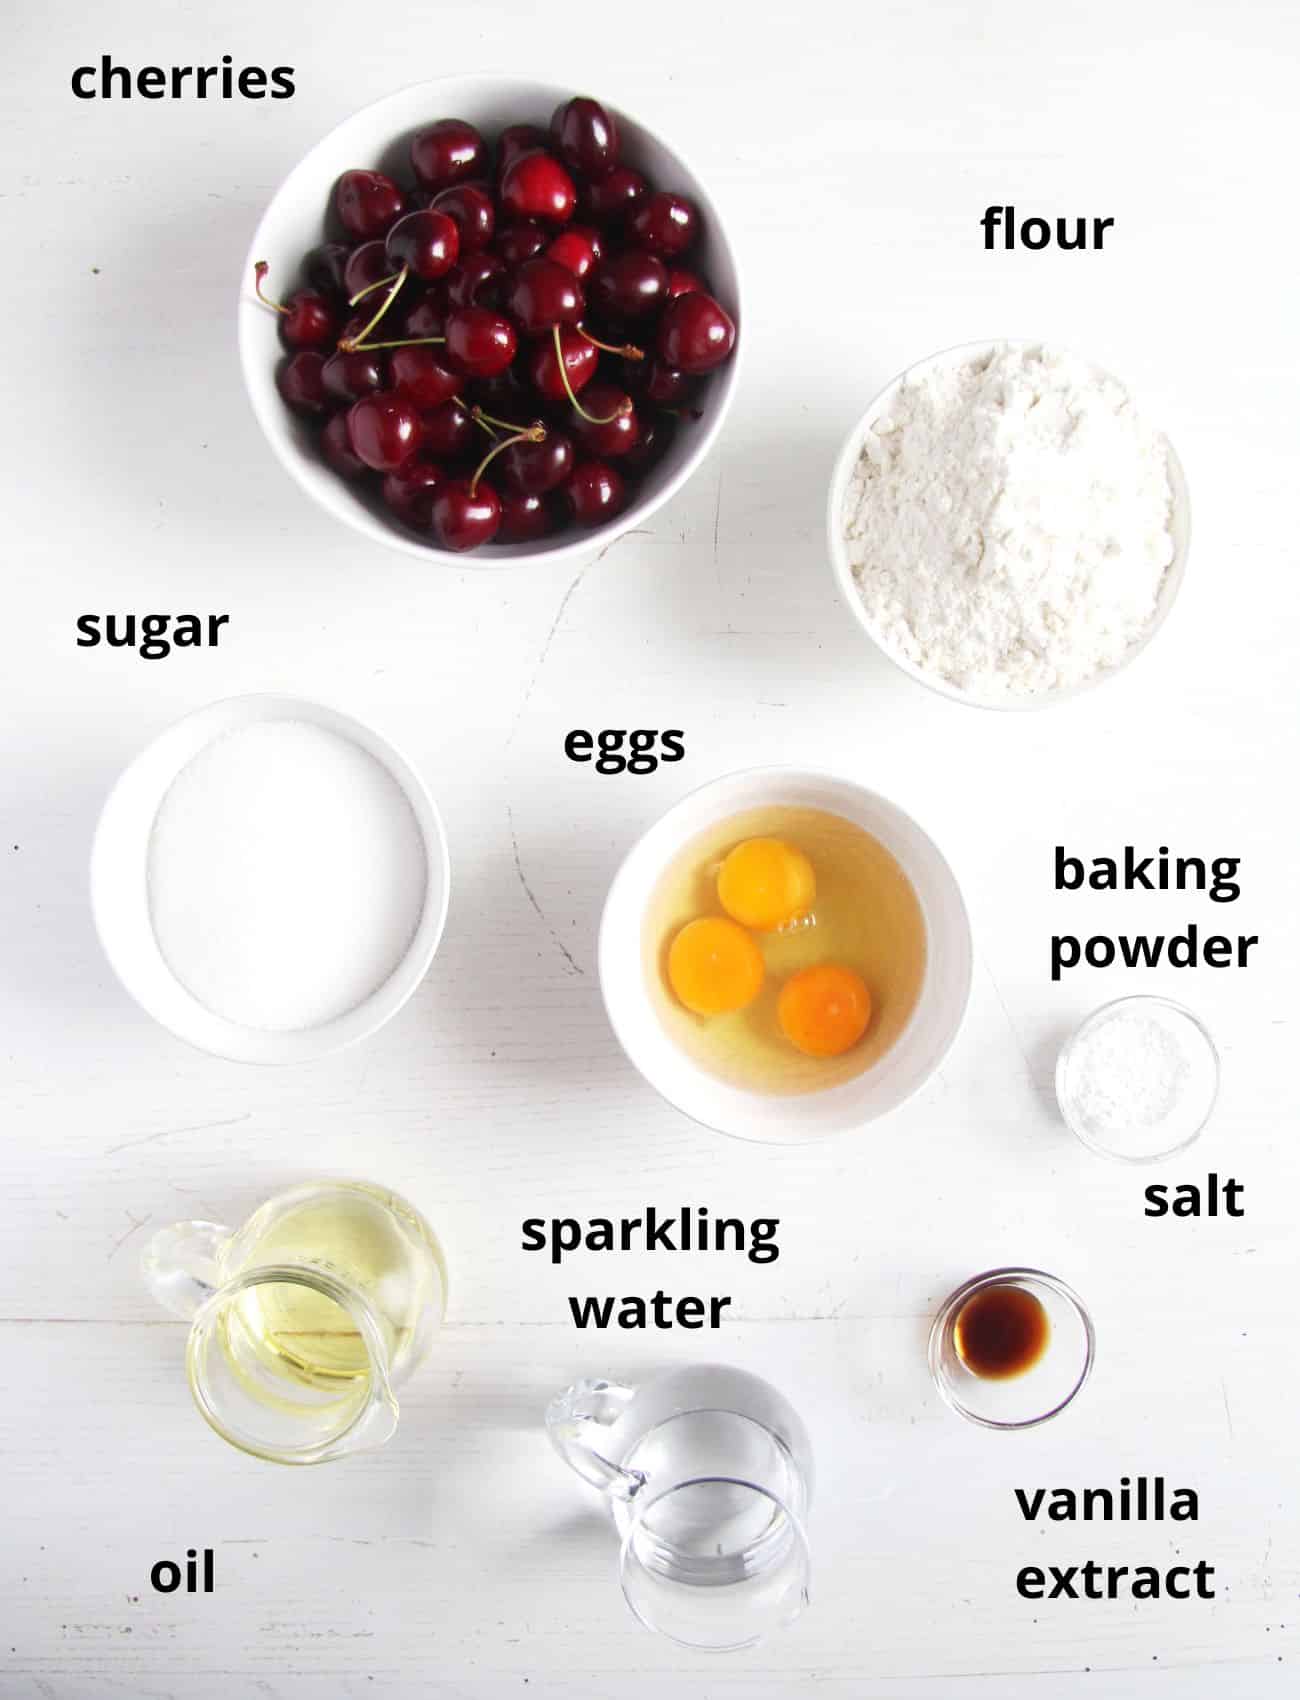 listed ingredients for making cherry bread.